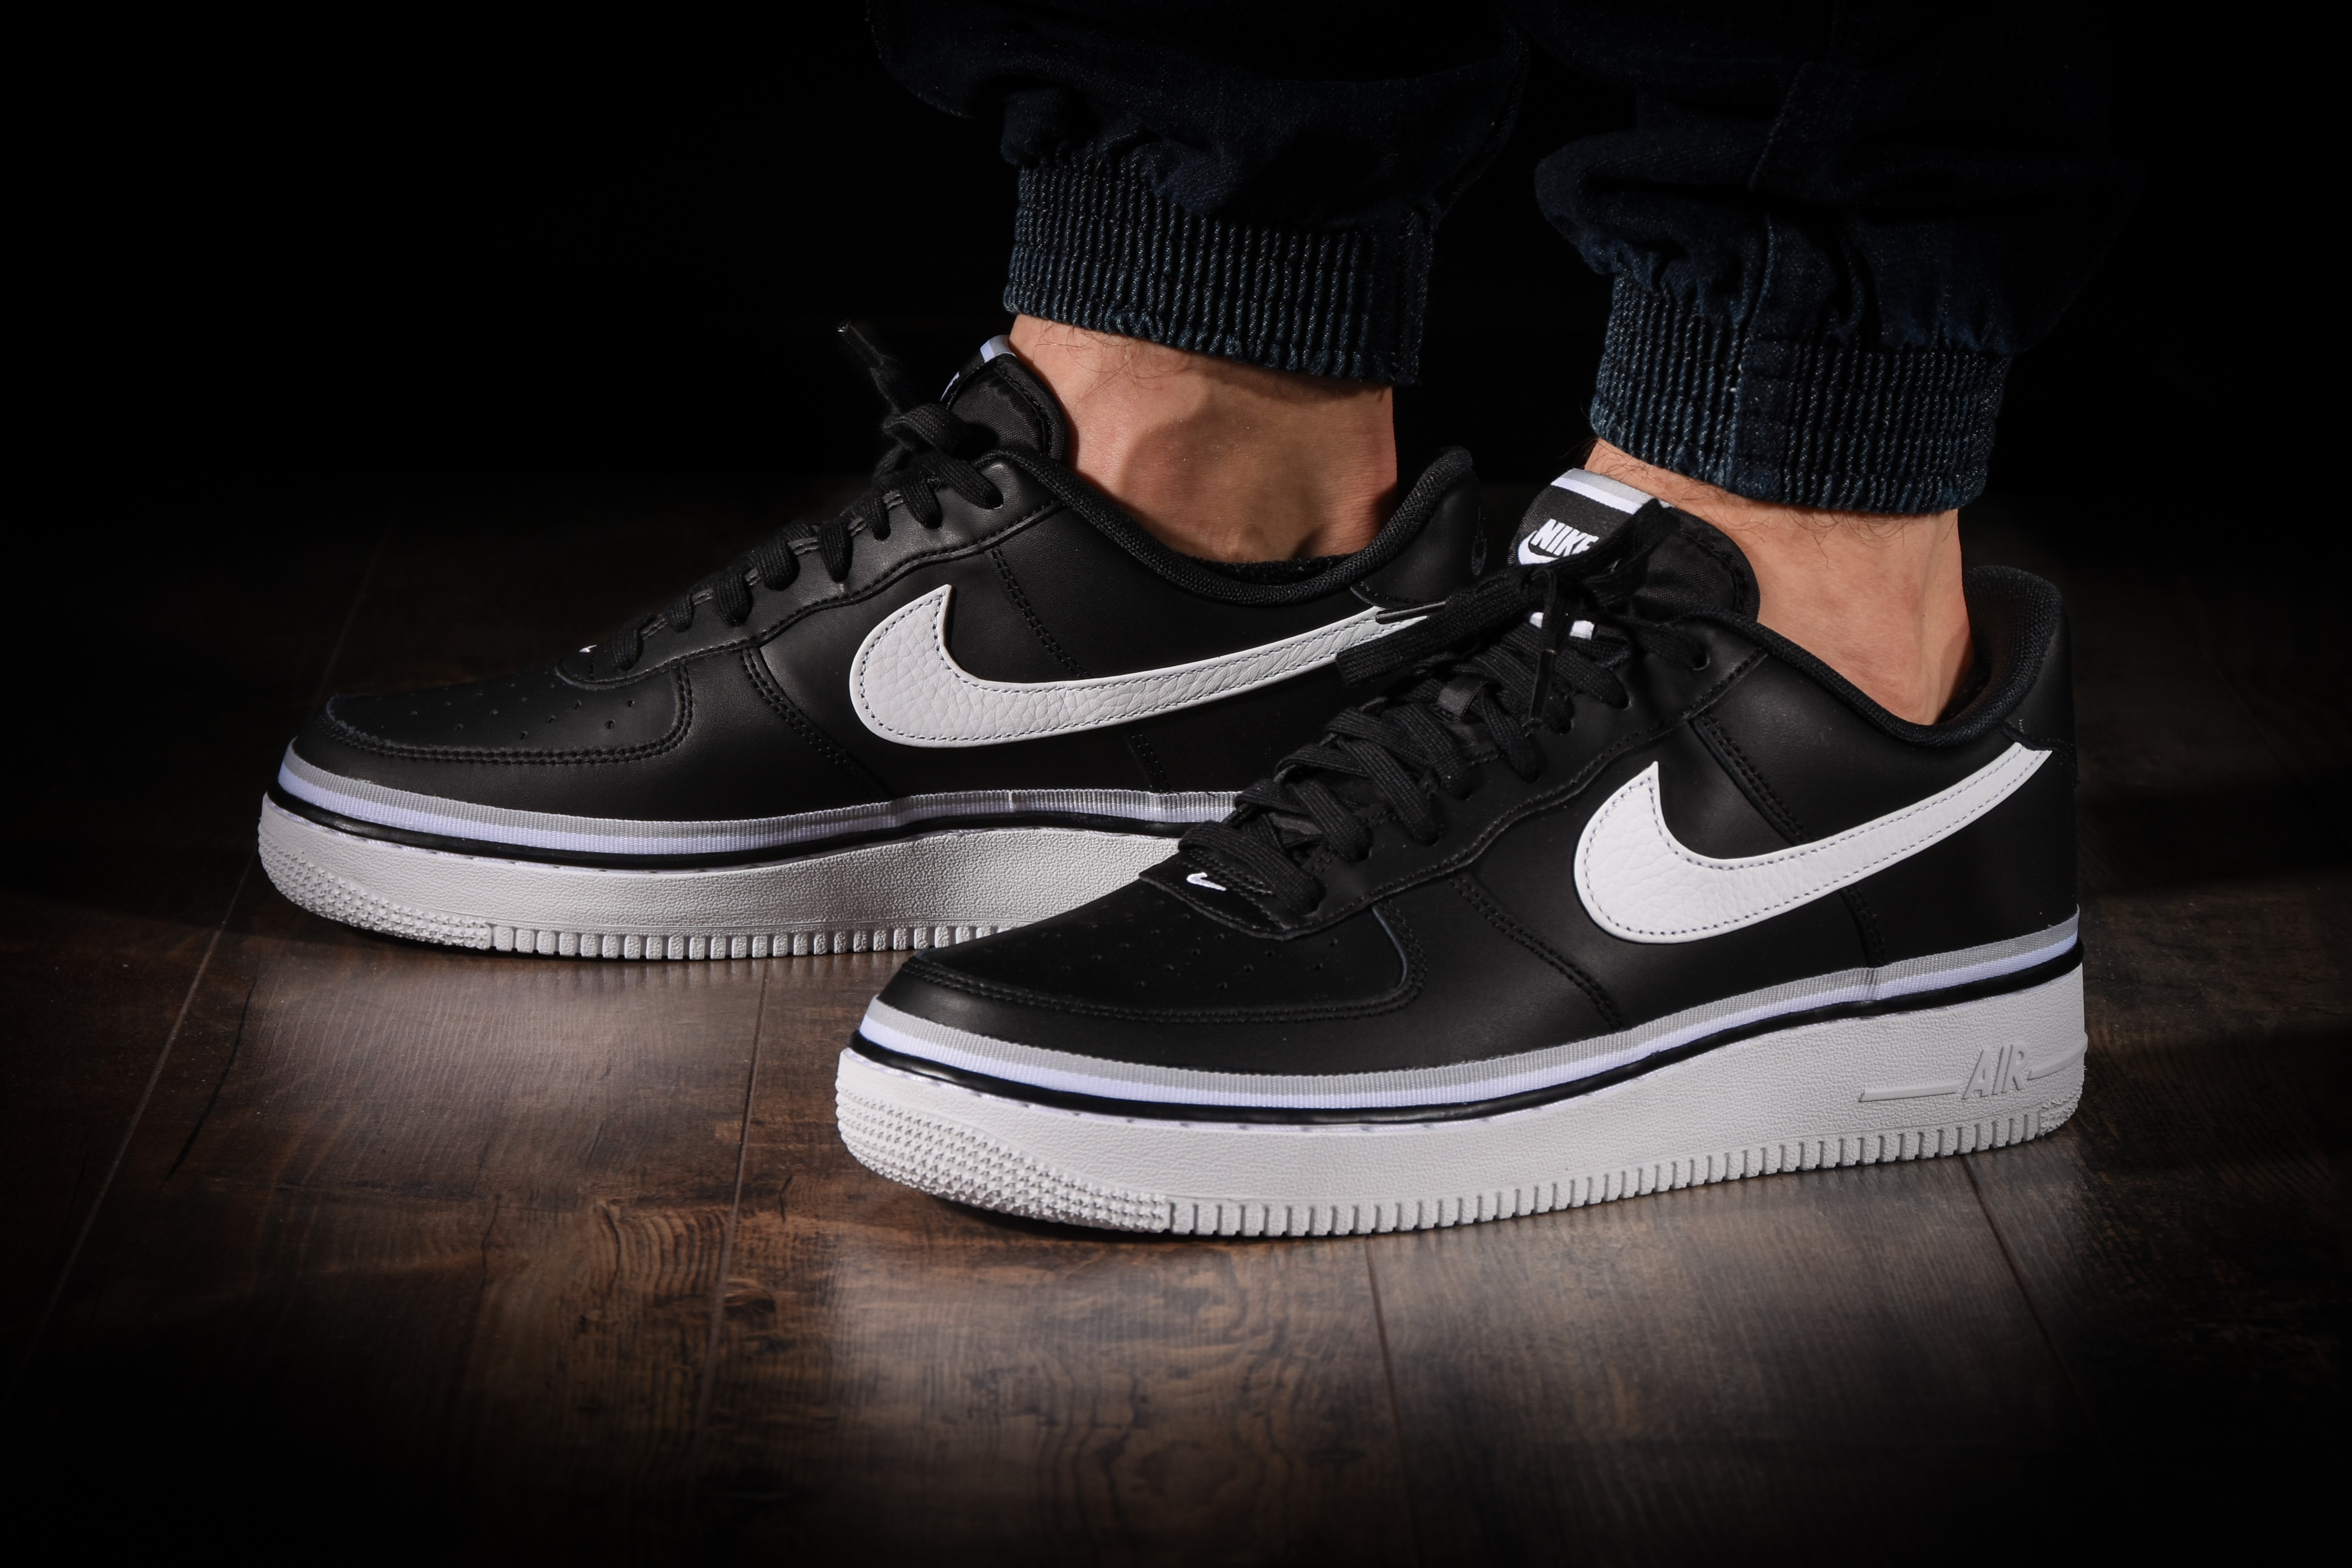 NIKE AIR FORCE 1 LOW '07 LV8 BLACK WHITE WOLF GREY